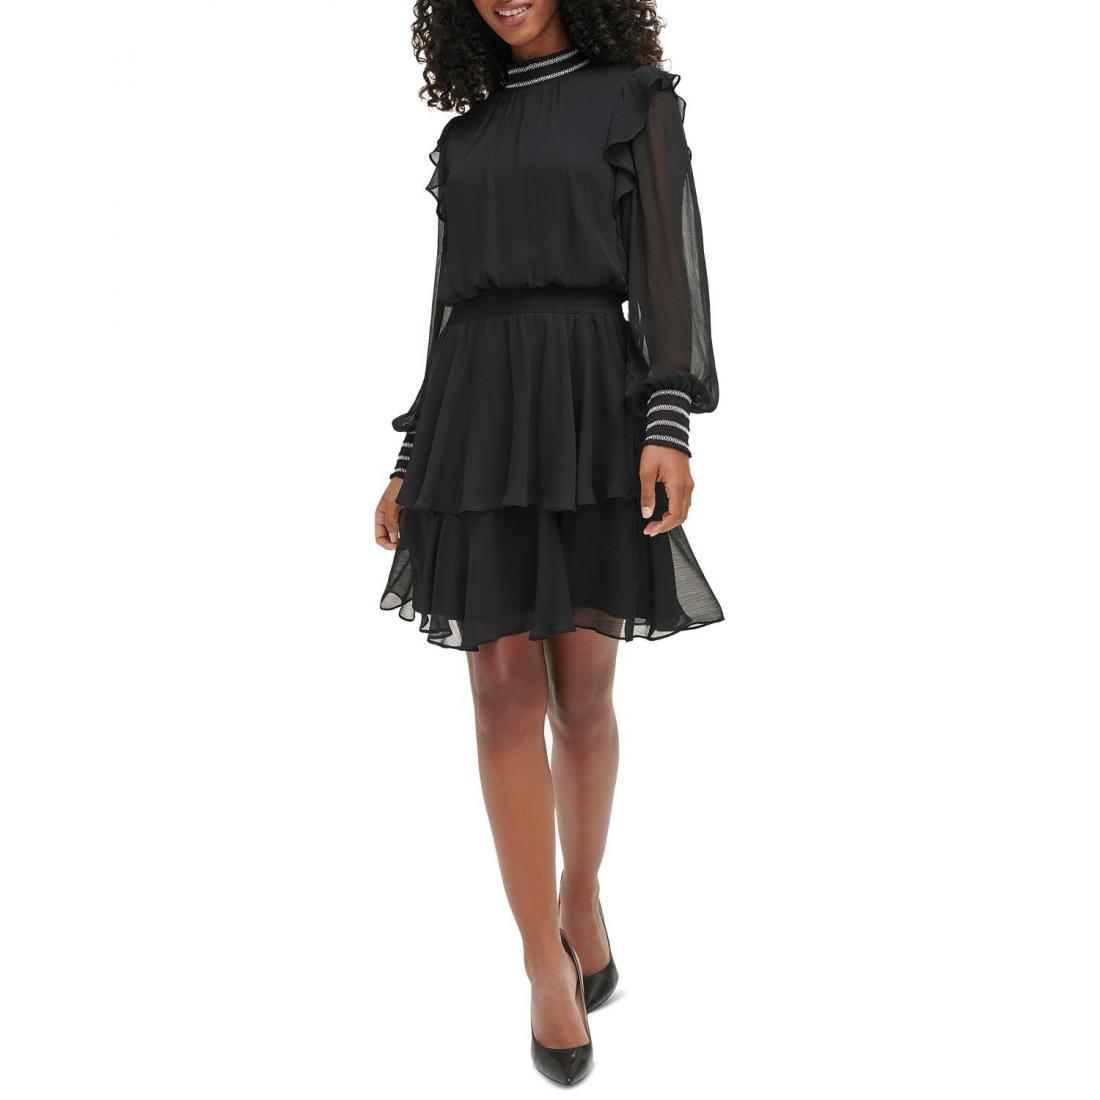 Women's 'Smocked-Trim Tiered' Long-Sleeved Dress